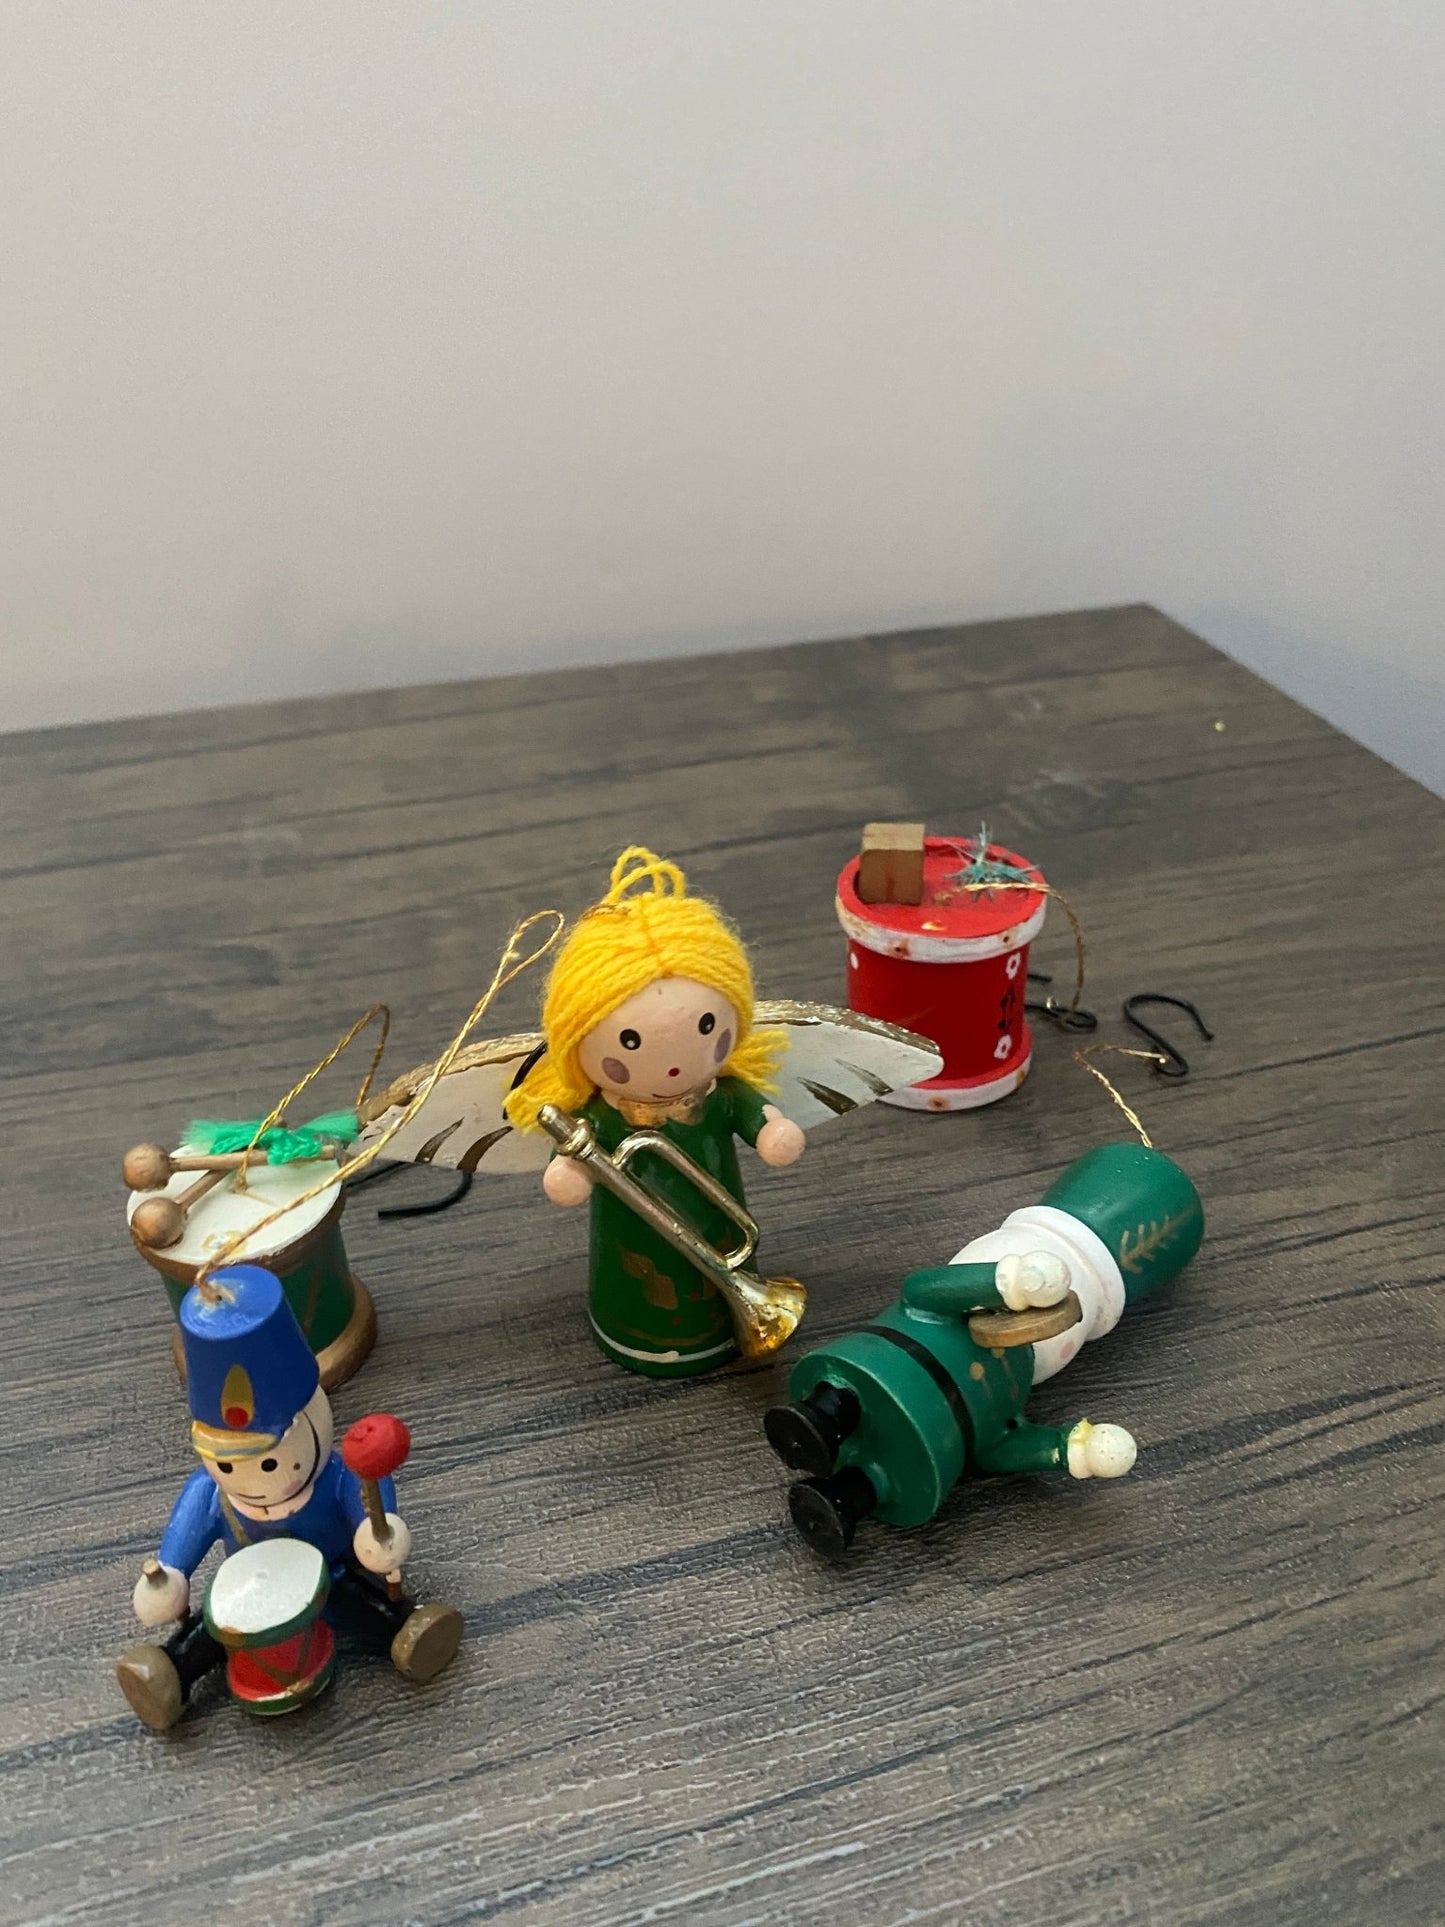 Lot of Vintage Wooden Christmas Ornaments - Handpainted Band People - Perth Market